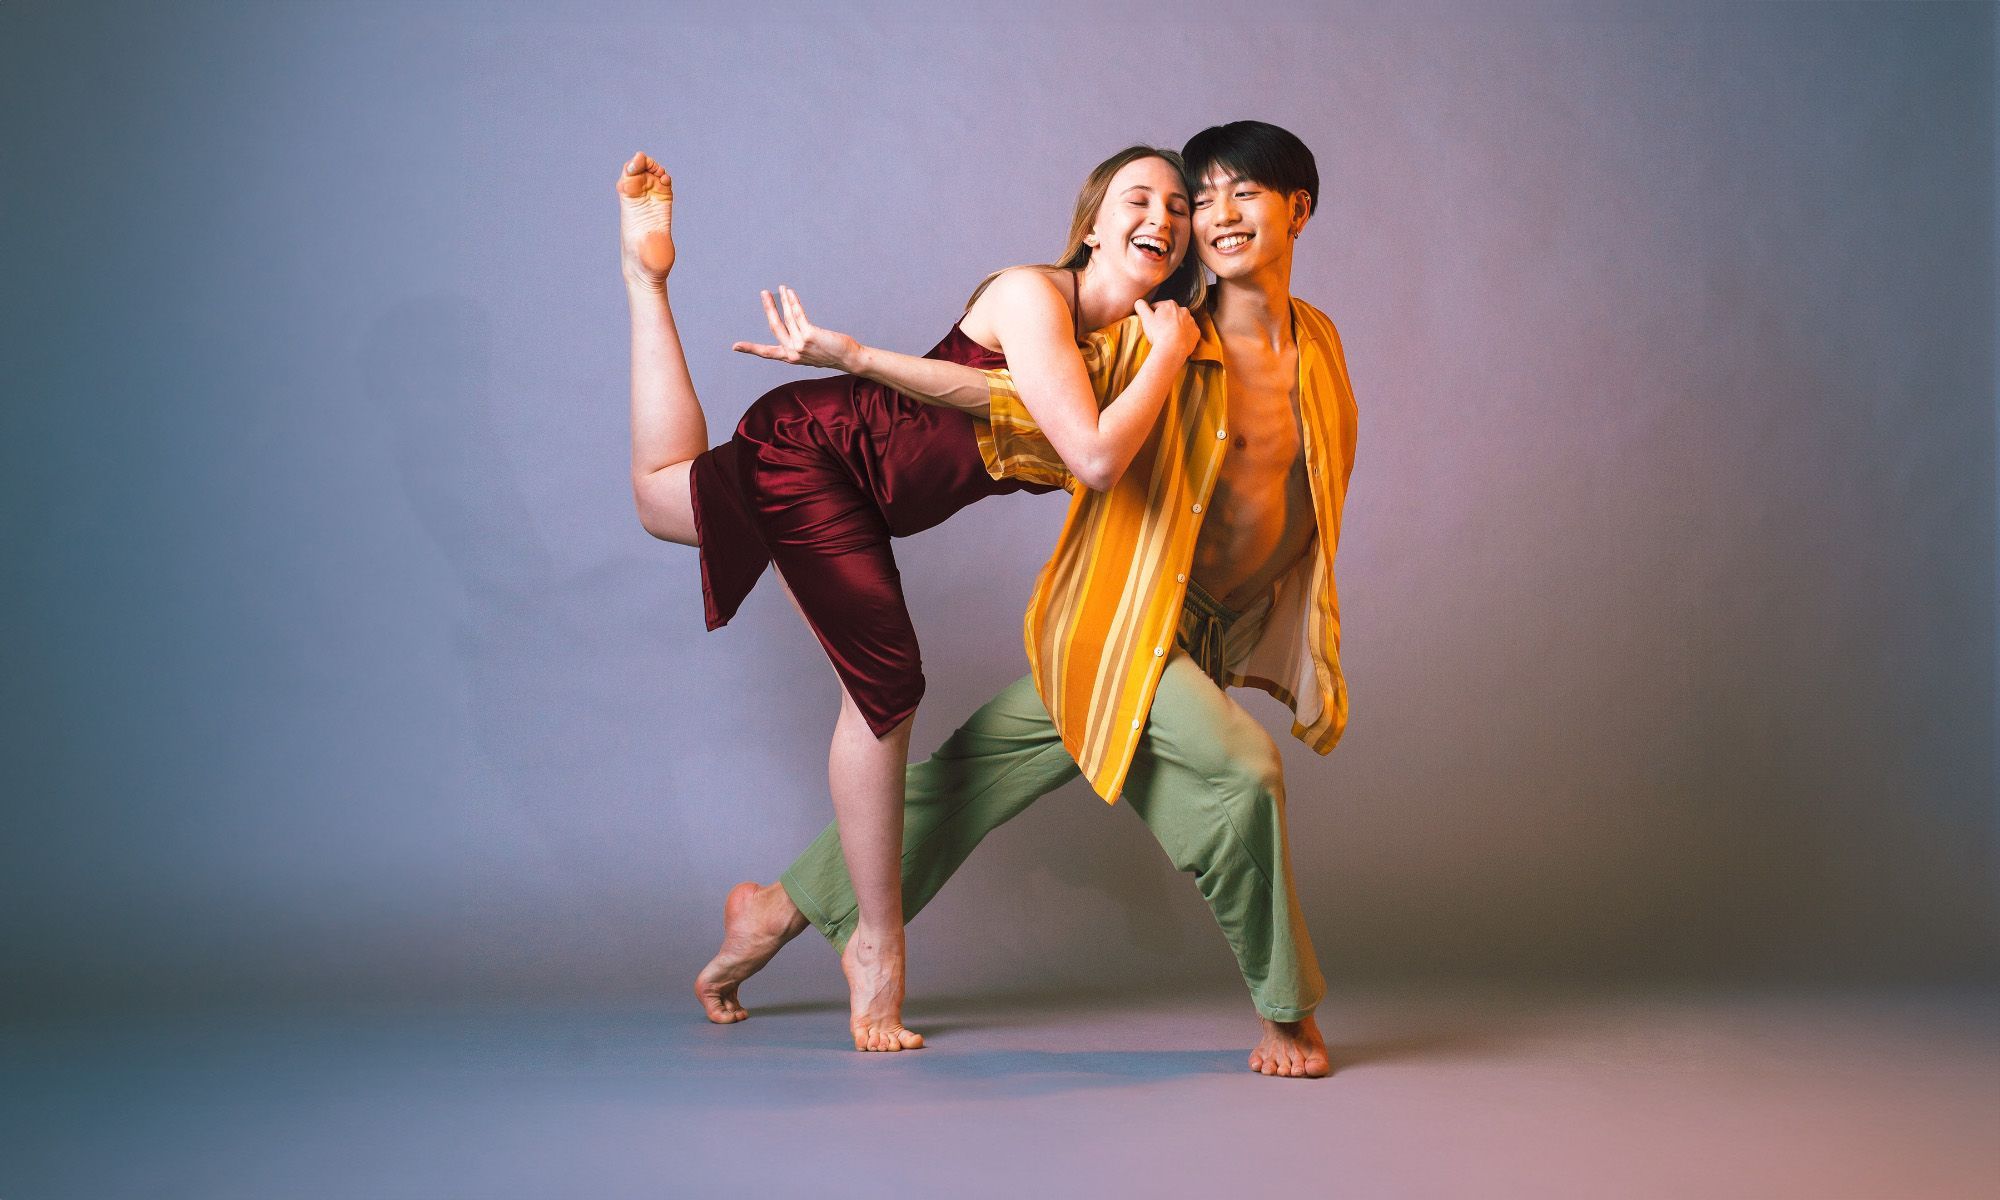 Two dancers laughing together as they pose.